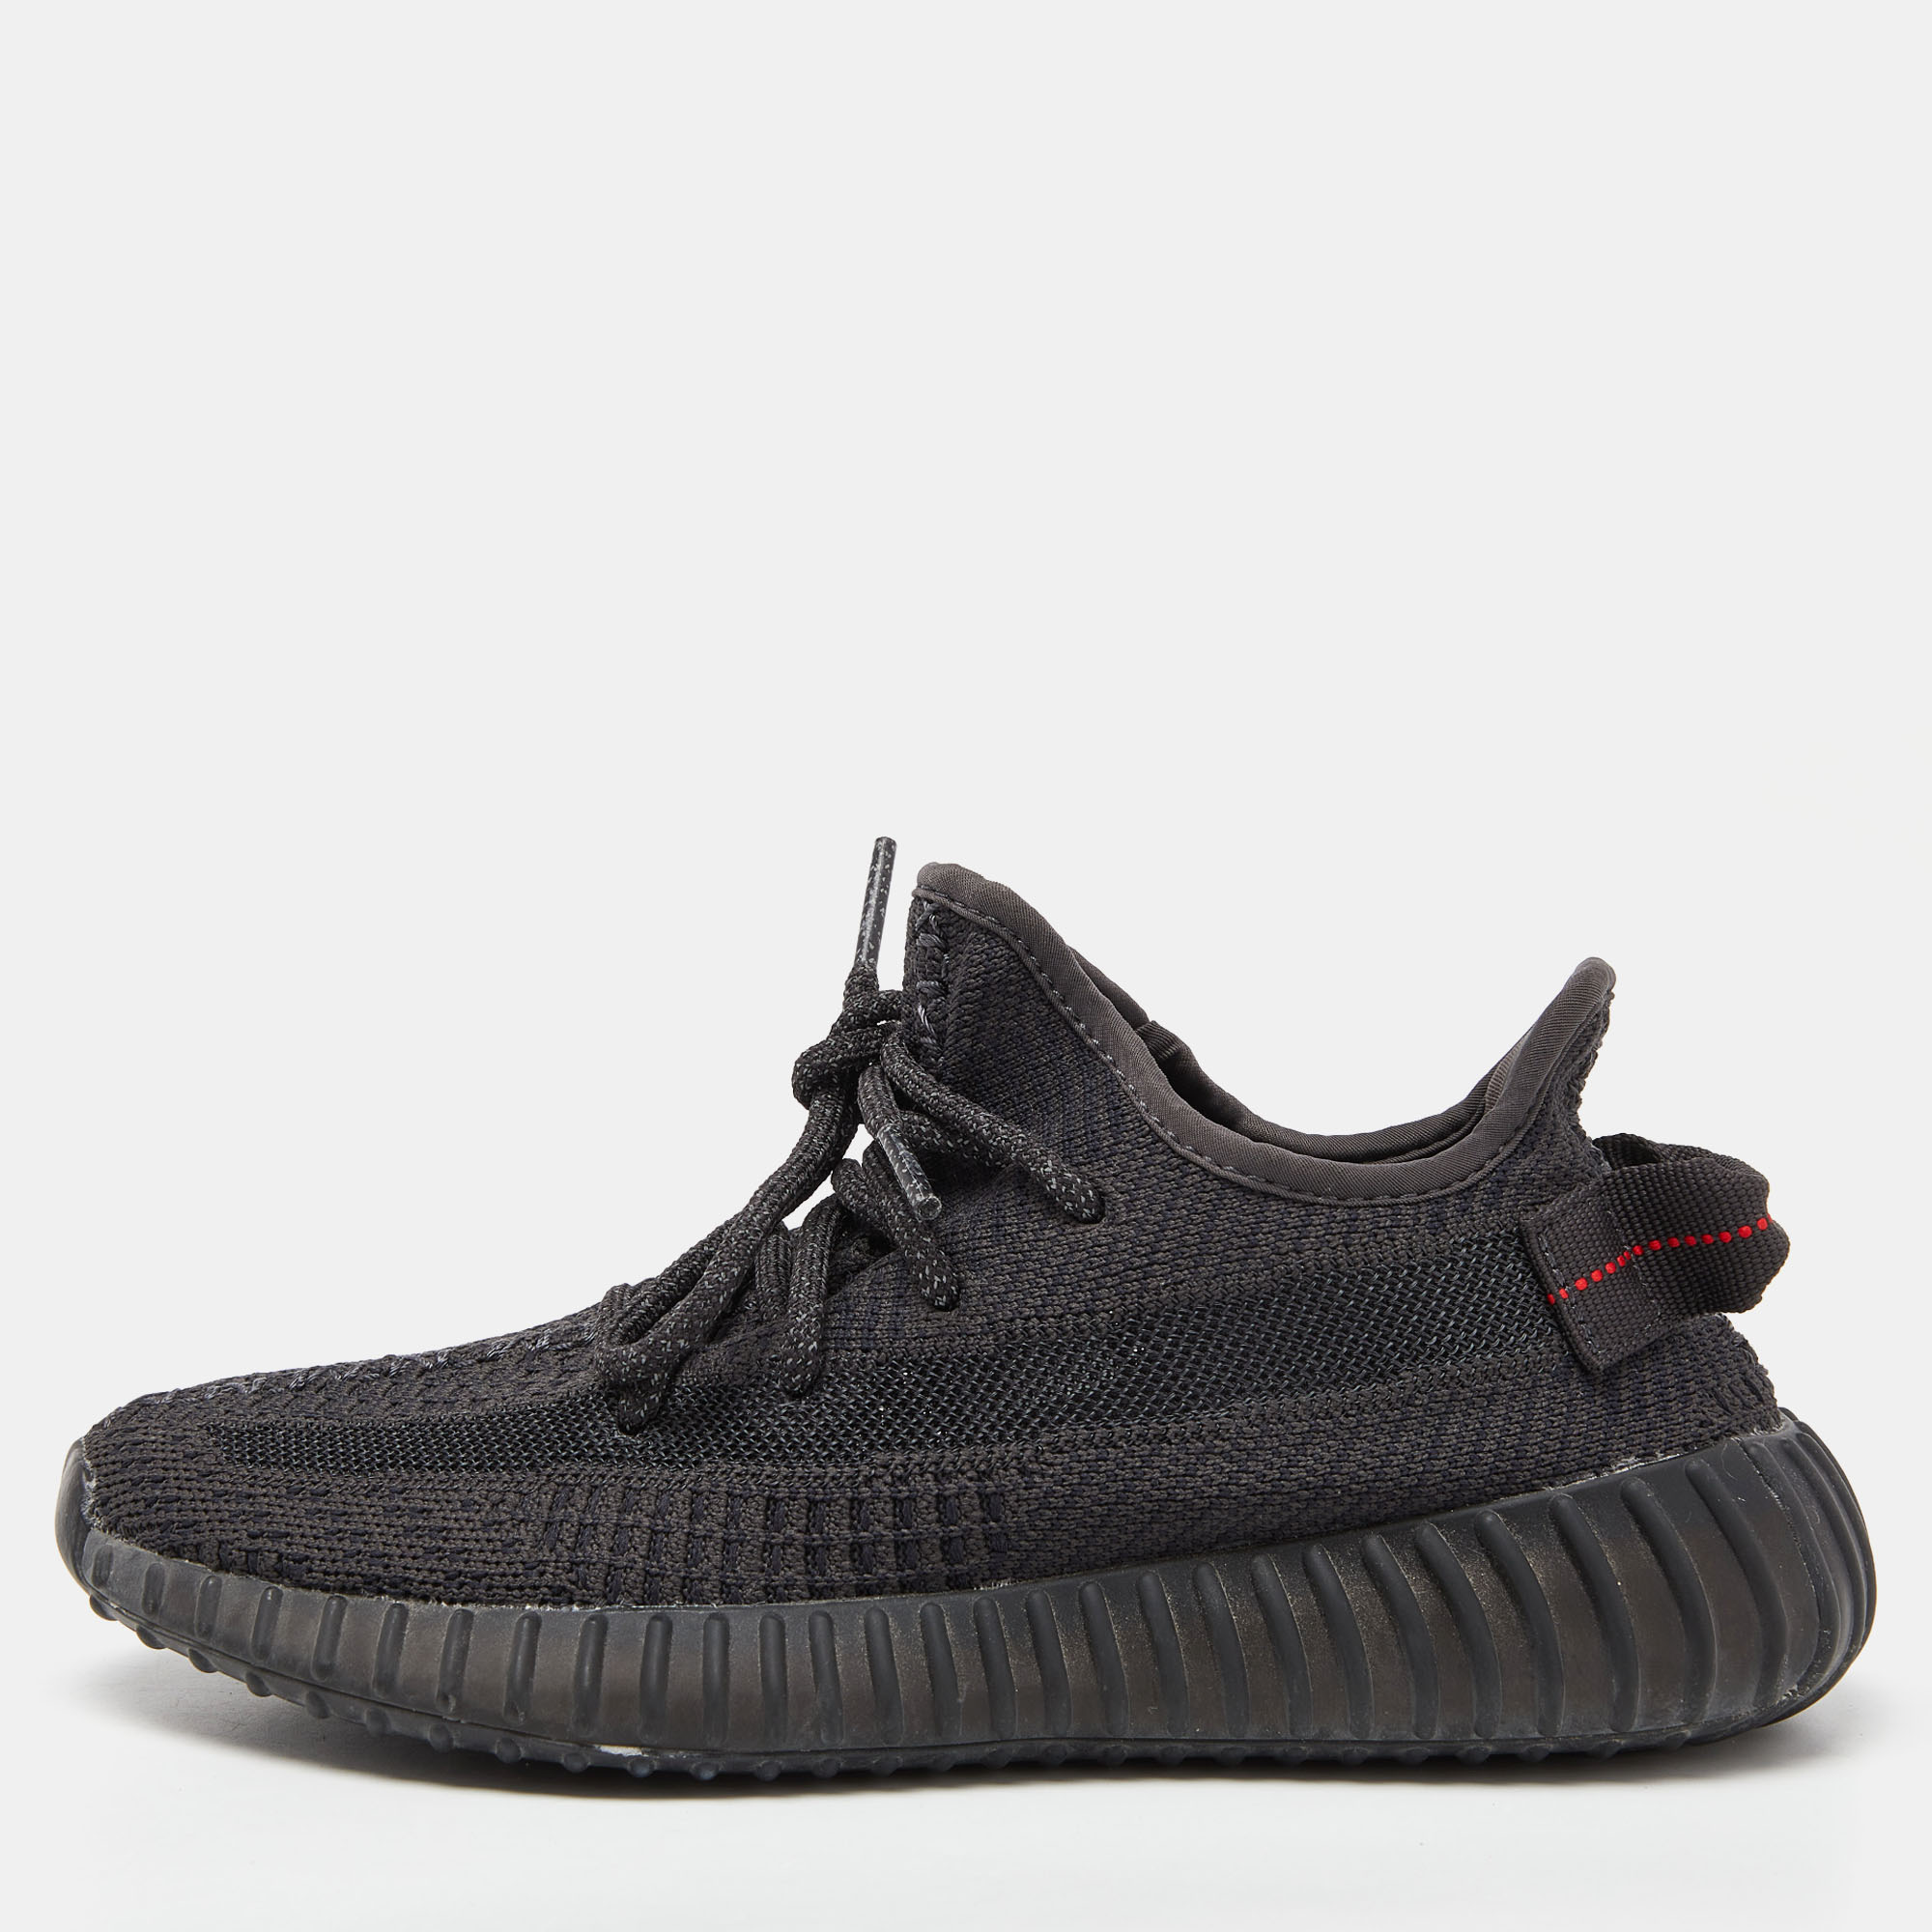 Let this comfortable pair be your first choice when youre out for a long day. These Yeezy x adidas shoes have well sewn uppers beautifully set on durable soles.